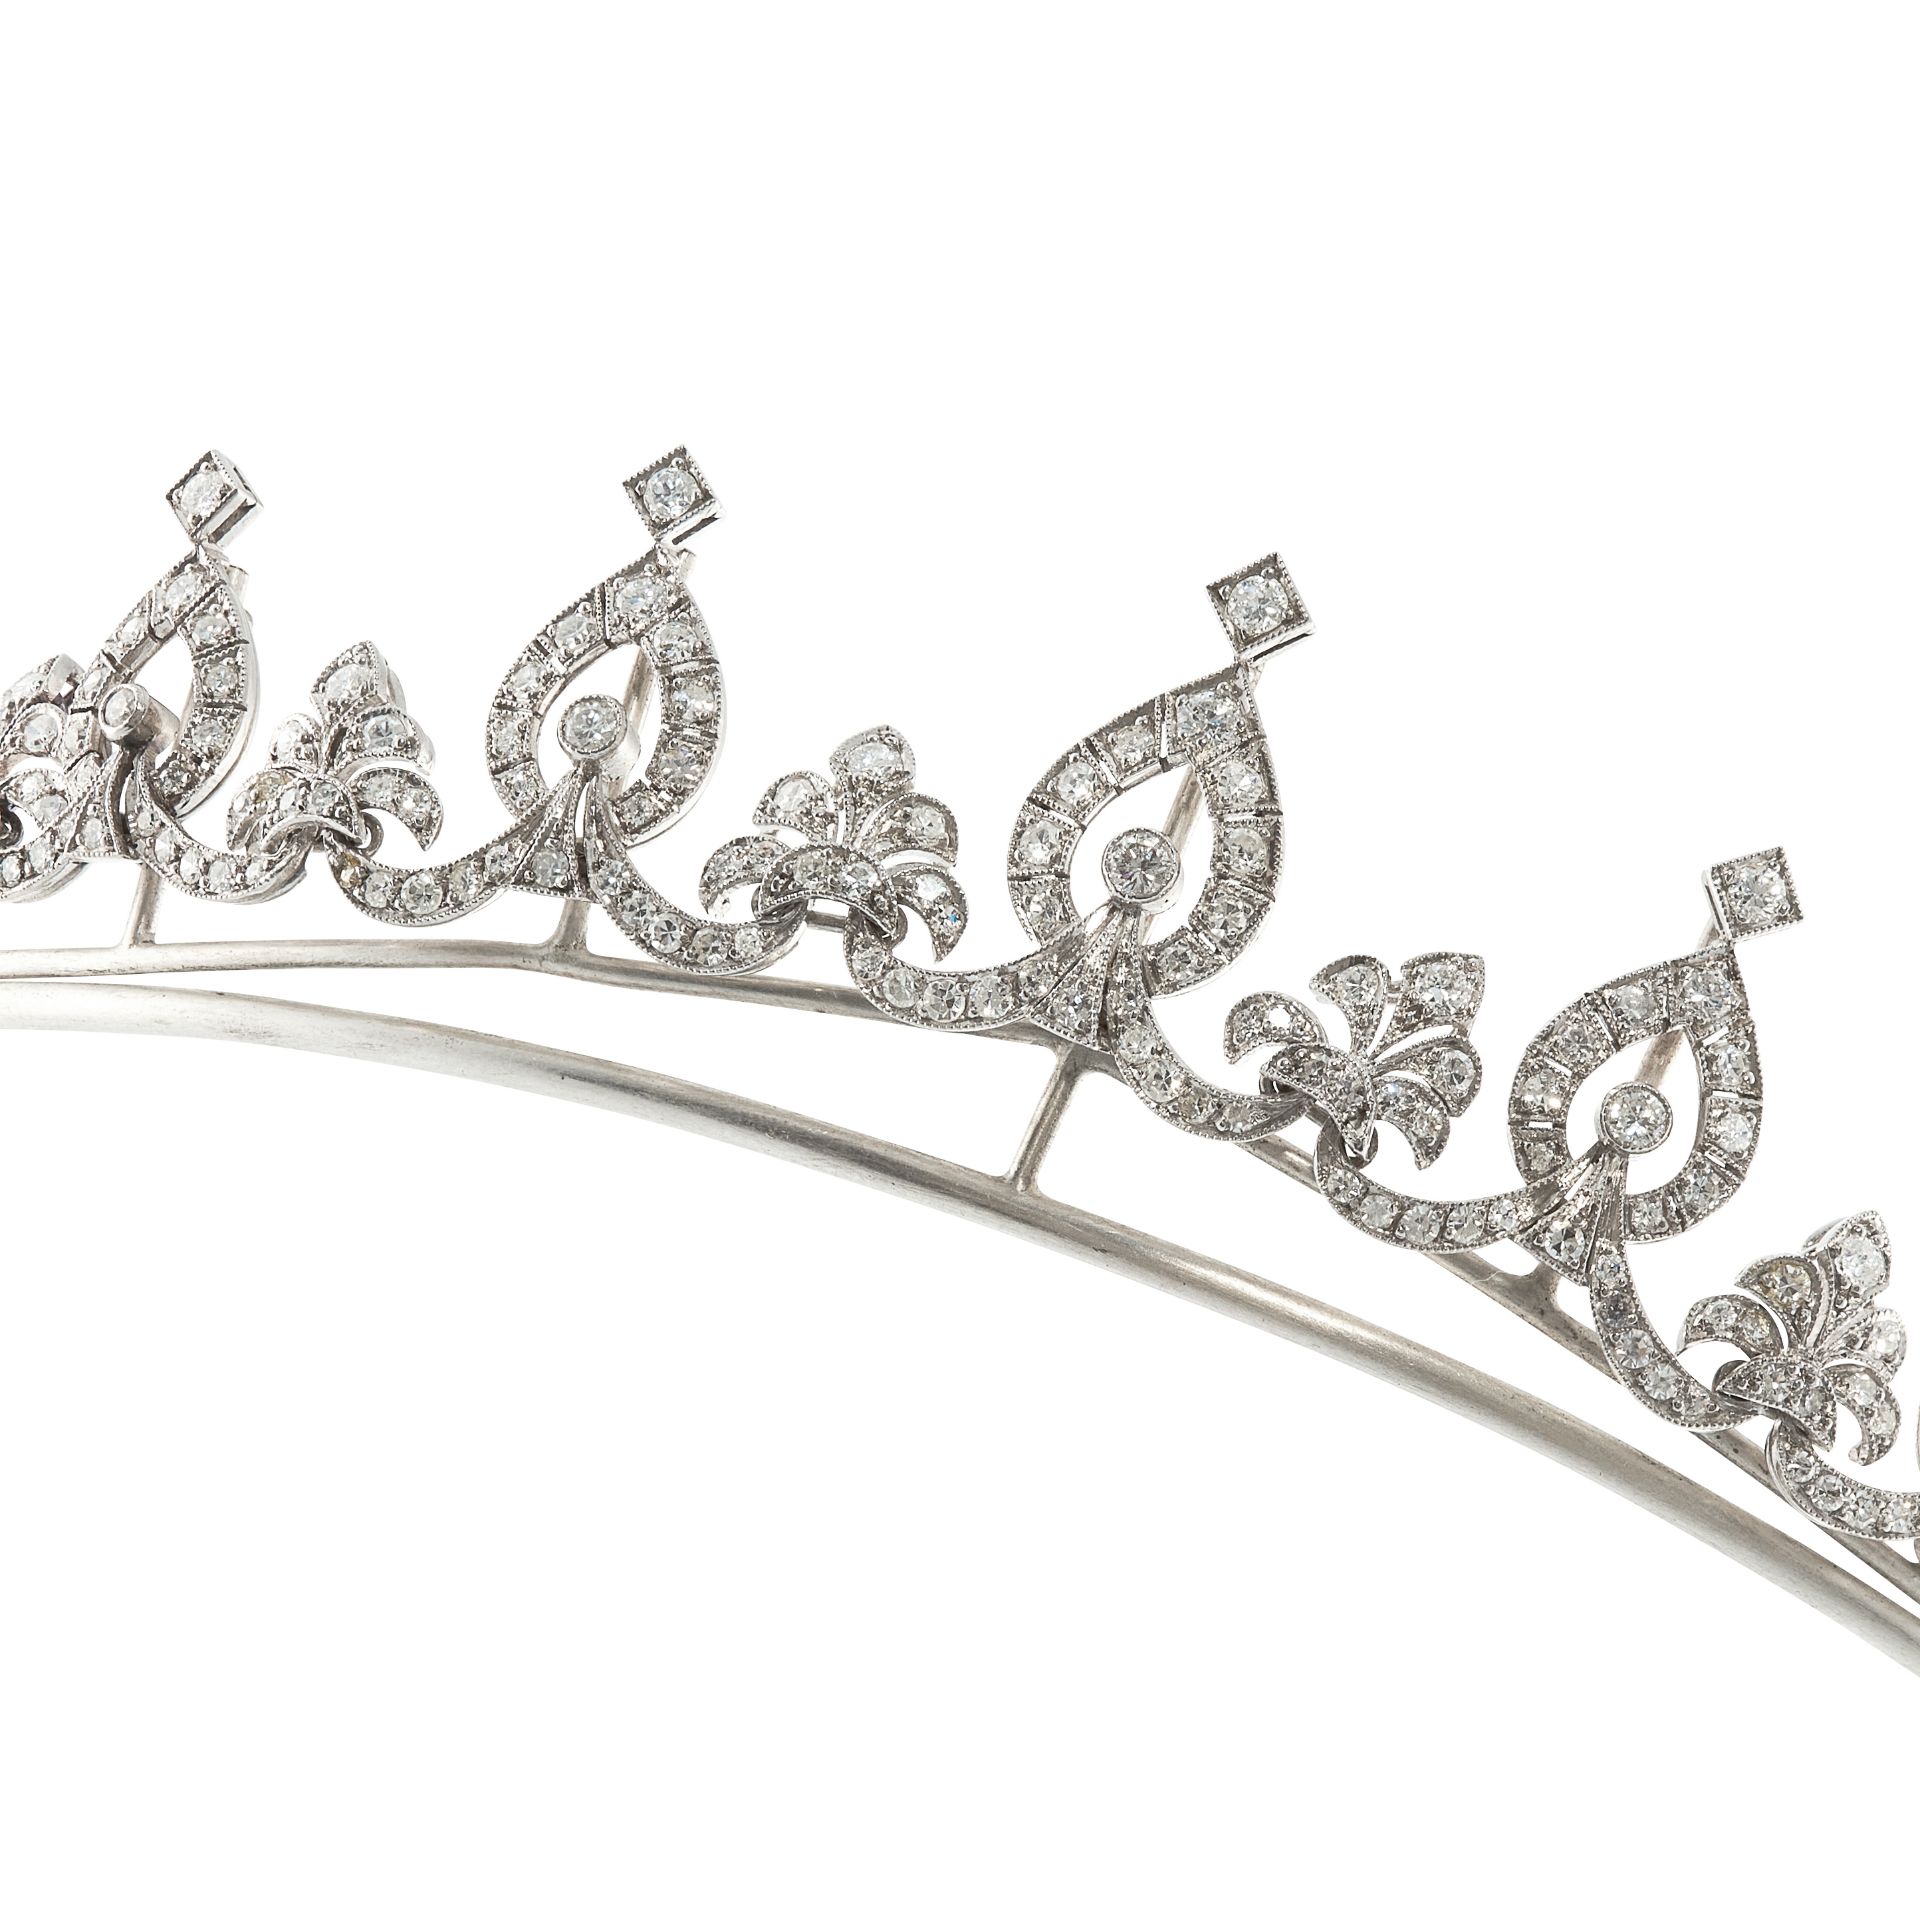 A DIAMOND TIARA in white gold and silver, designed as a row of seven graduated navette motifs - Bild 2 aus 2